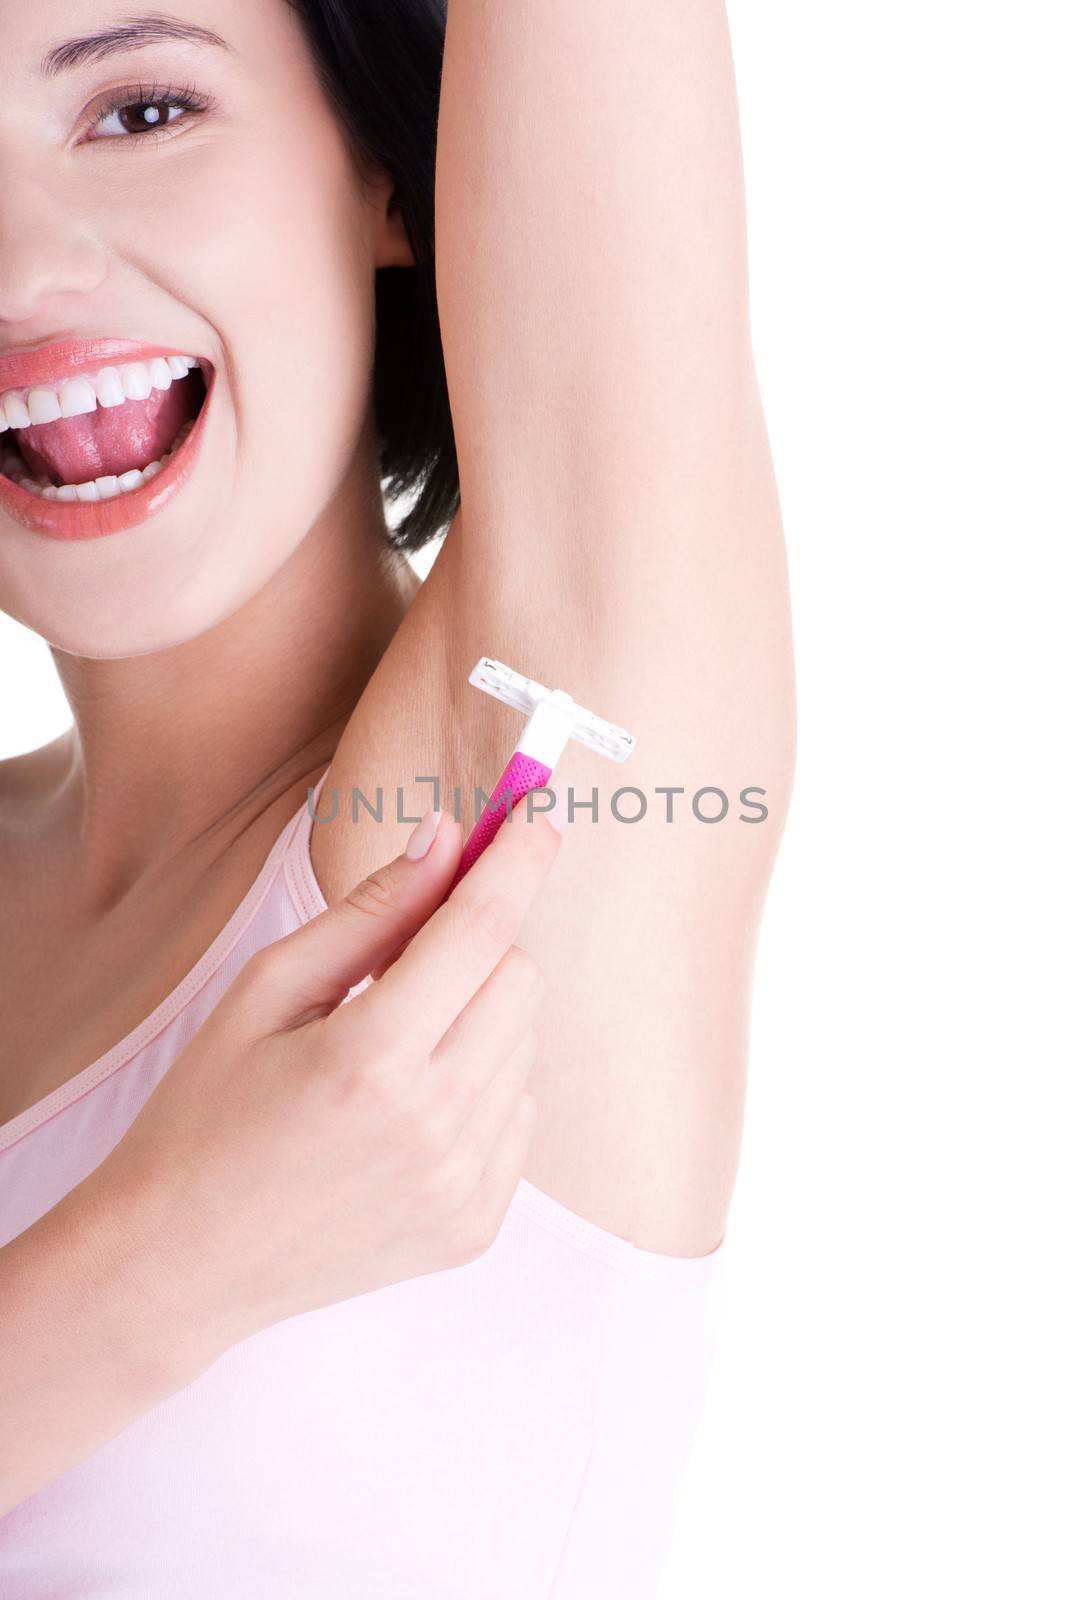 Beautiful smiling young woman shaving her armpit